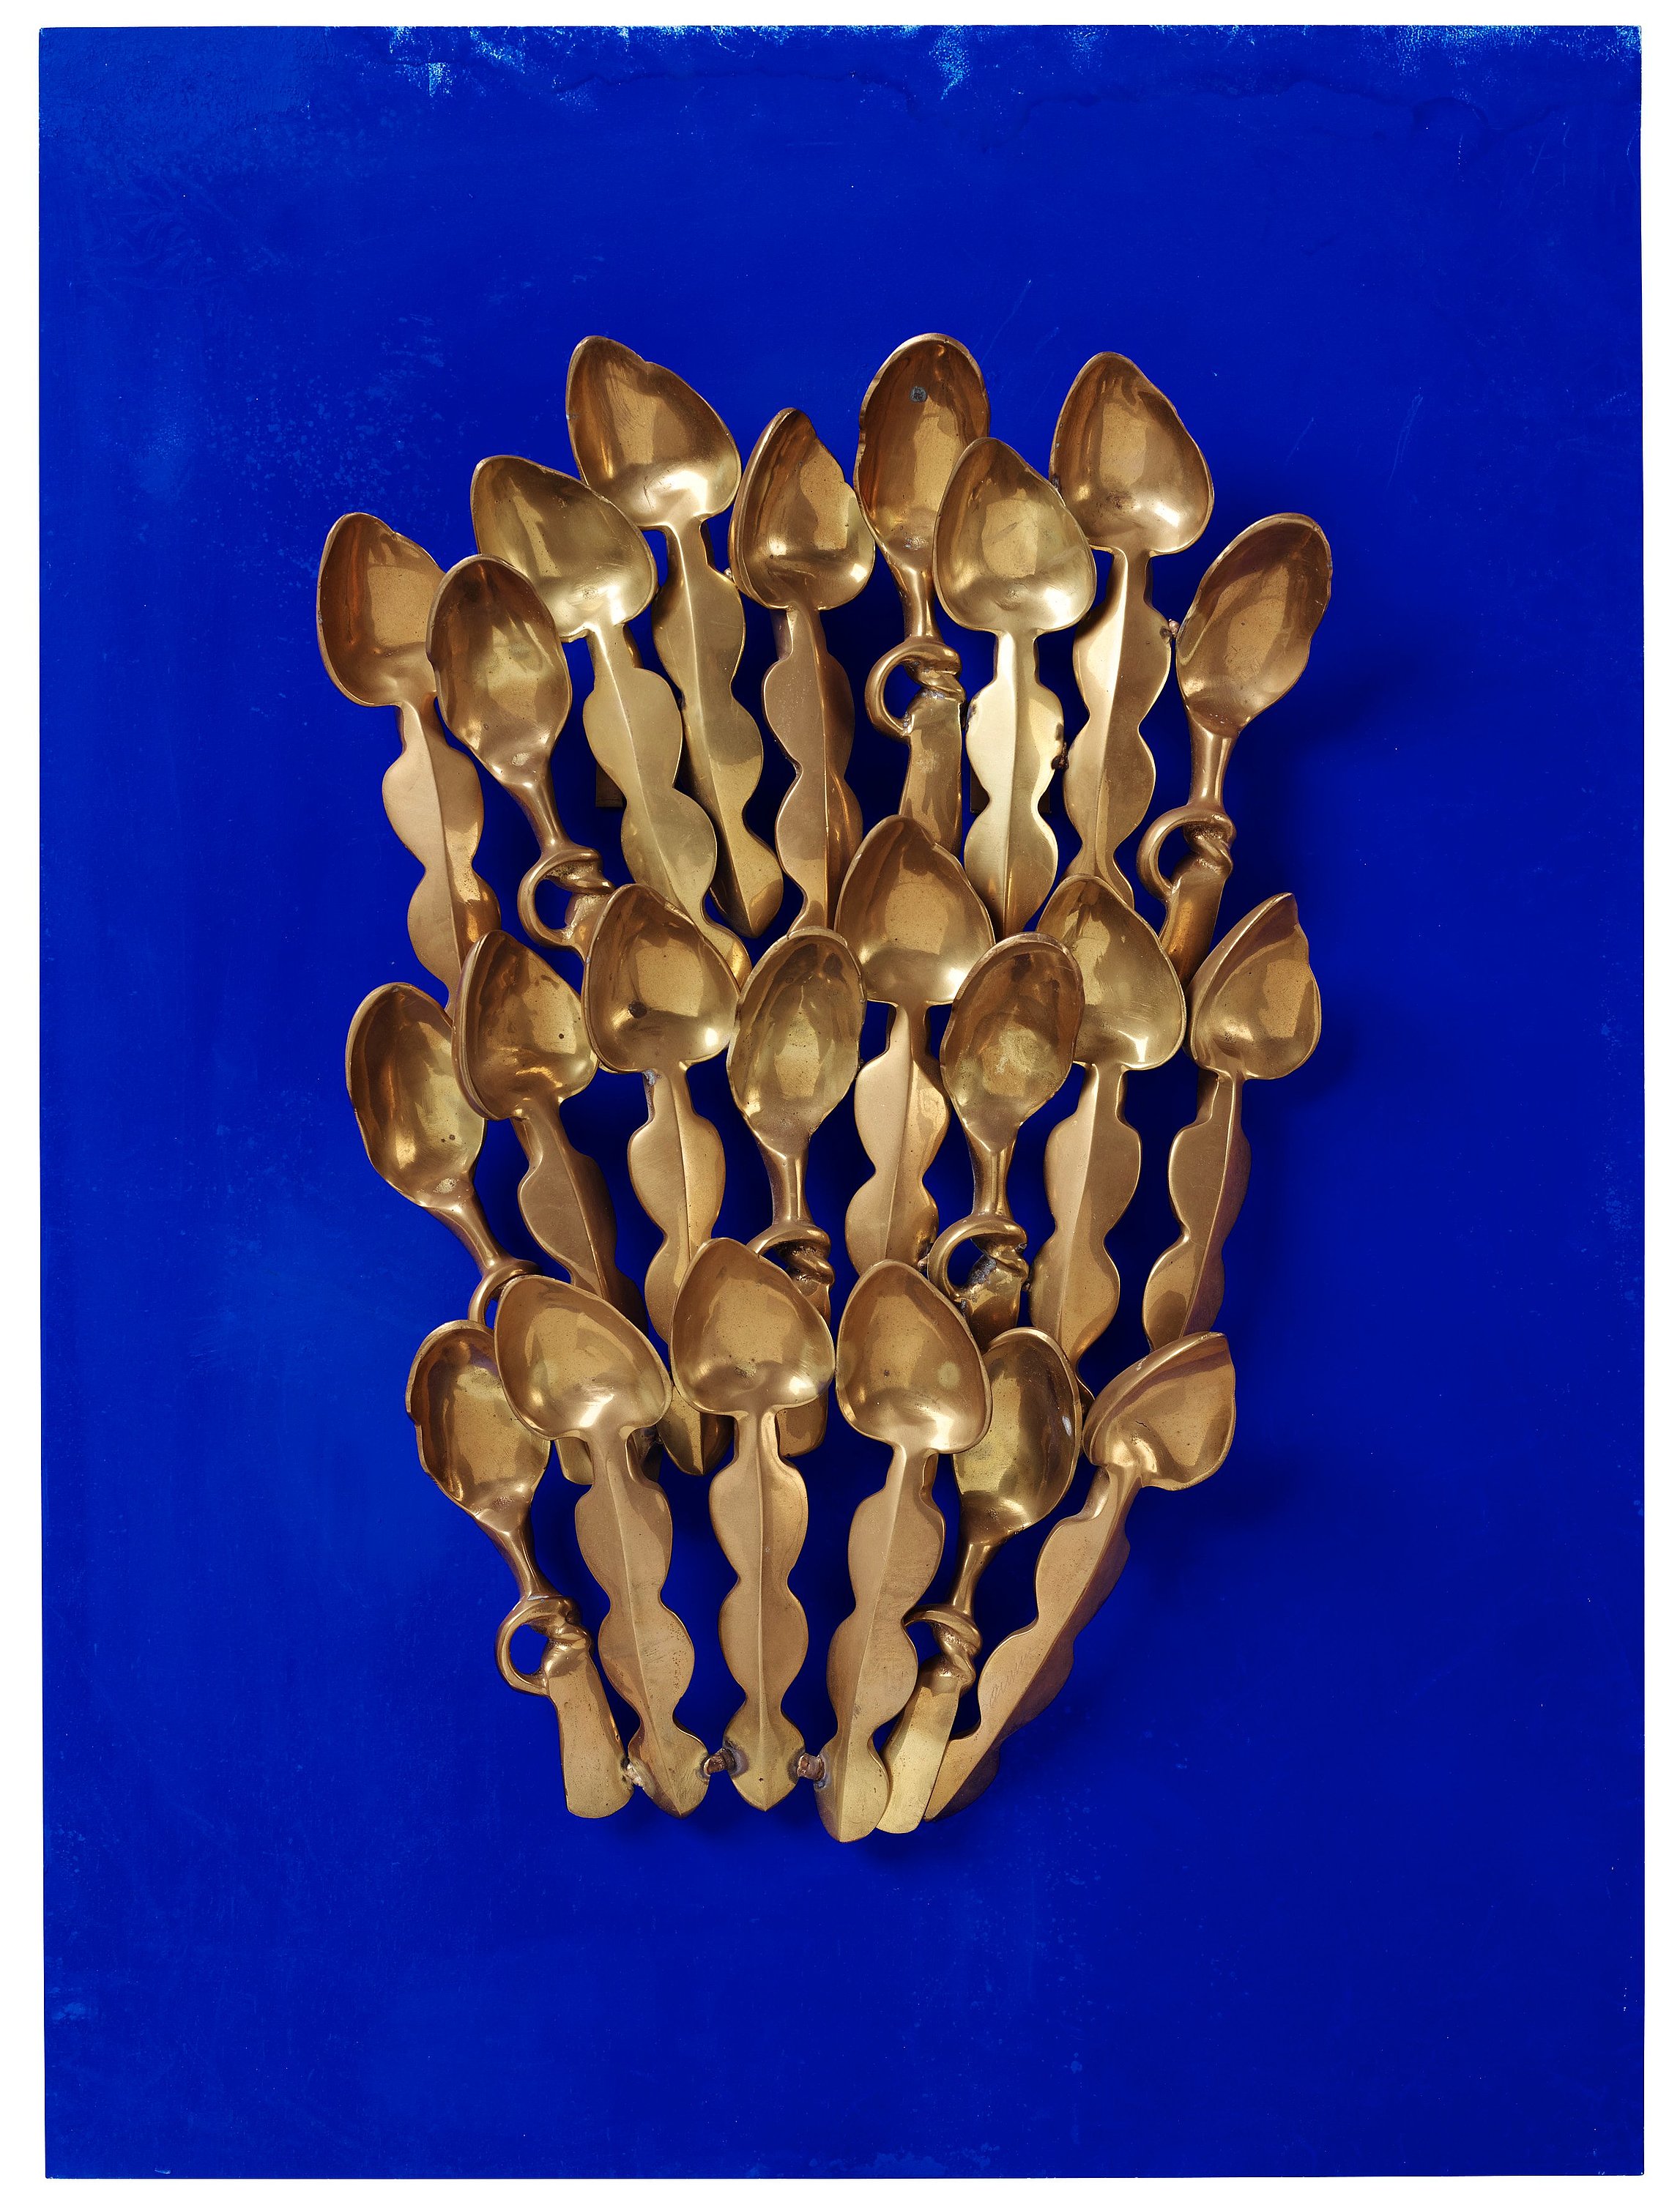 Arman, polished bronze mounted on Klein blue wooden panel, signed ...